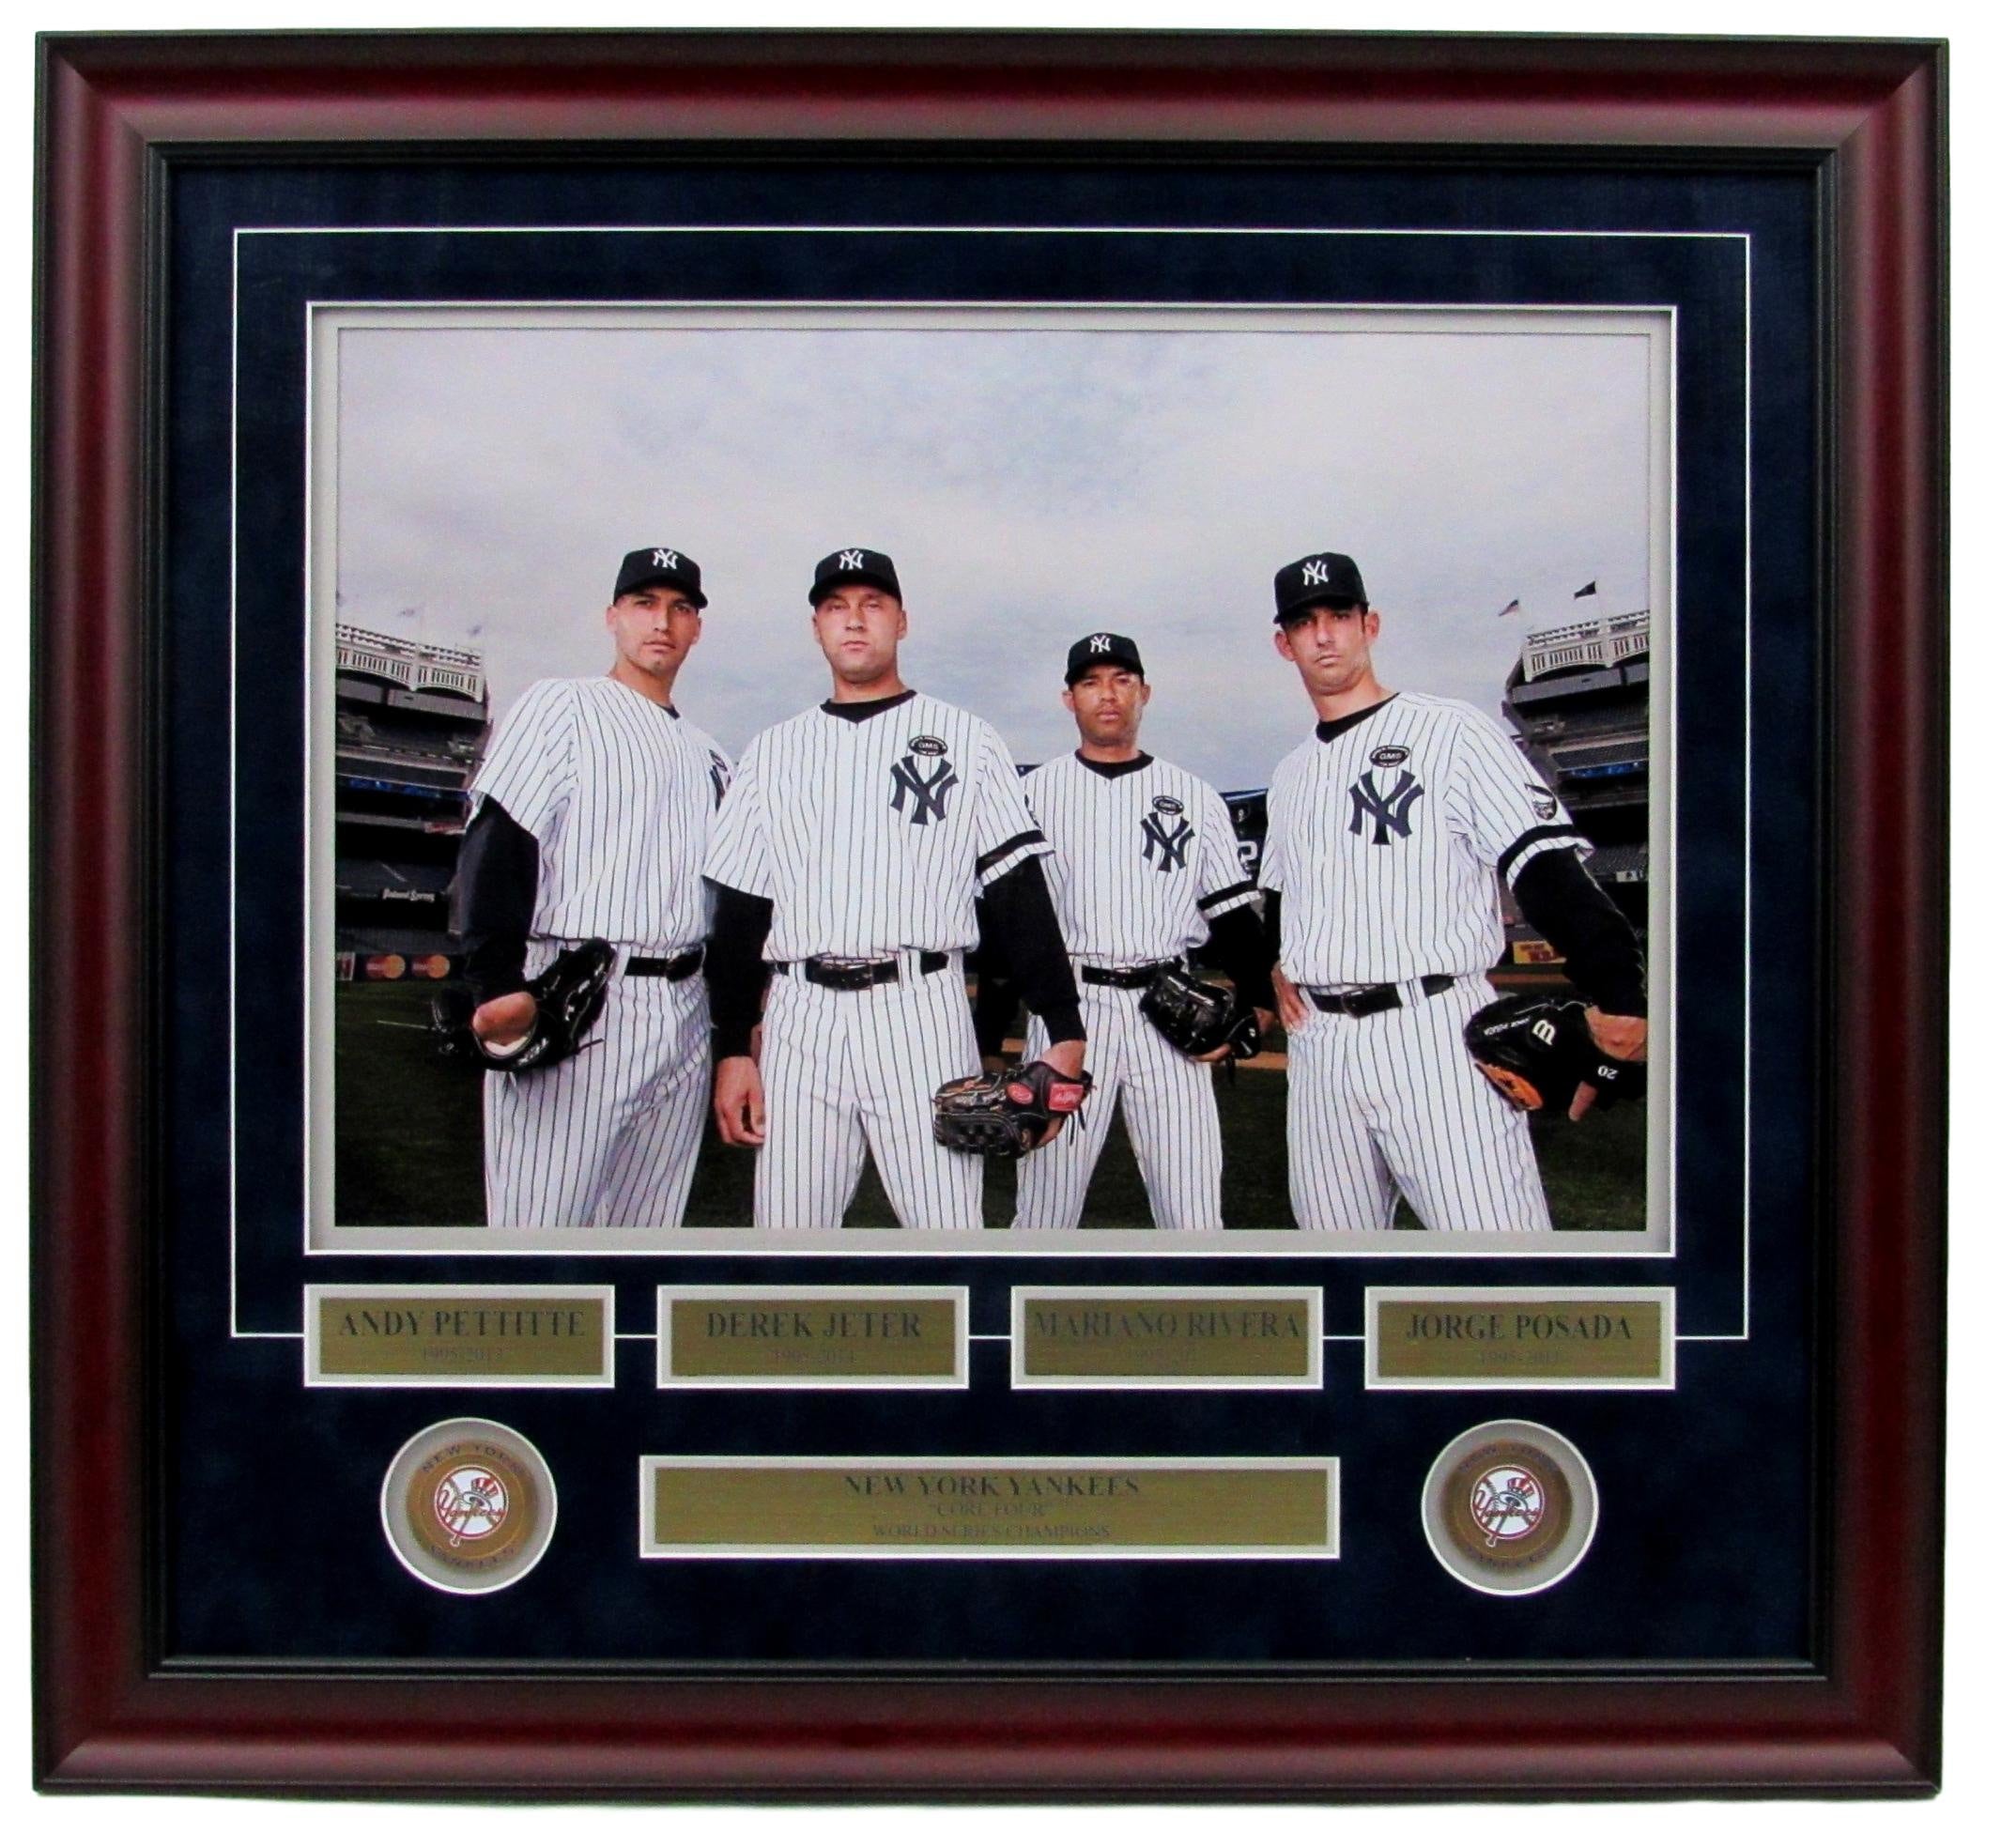  Derek Jeter Andy Pettitte Mariano Rivera Jorge Posada Yankees  2 Card Collector Plaque #1 w/ 8x10 Photo CORE Four : Sports & Outdoors